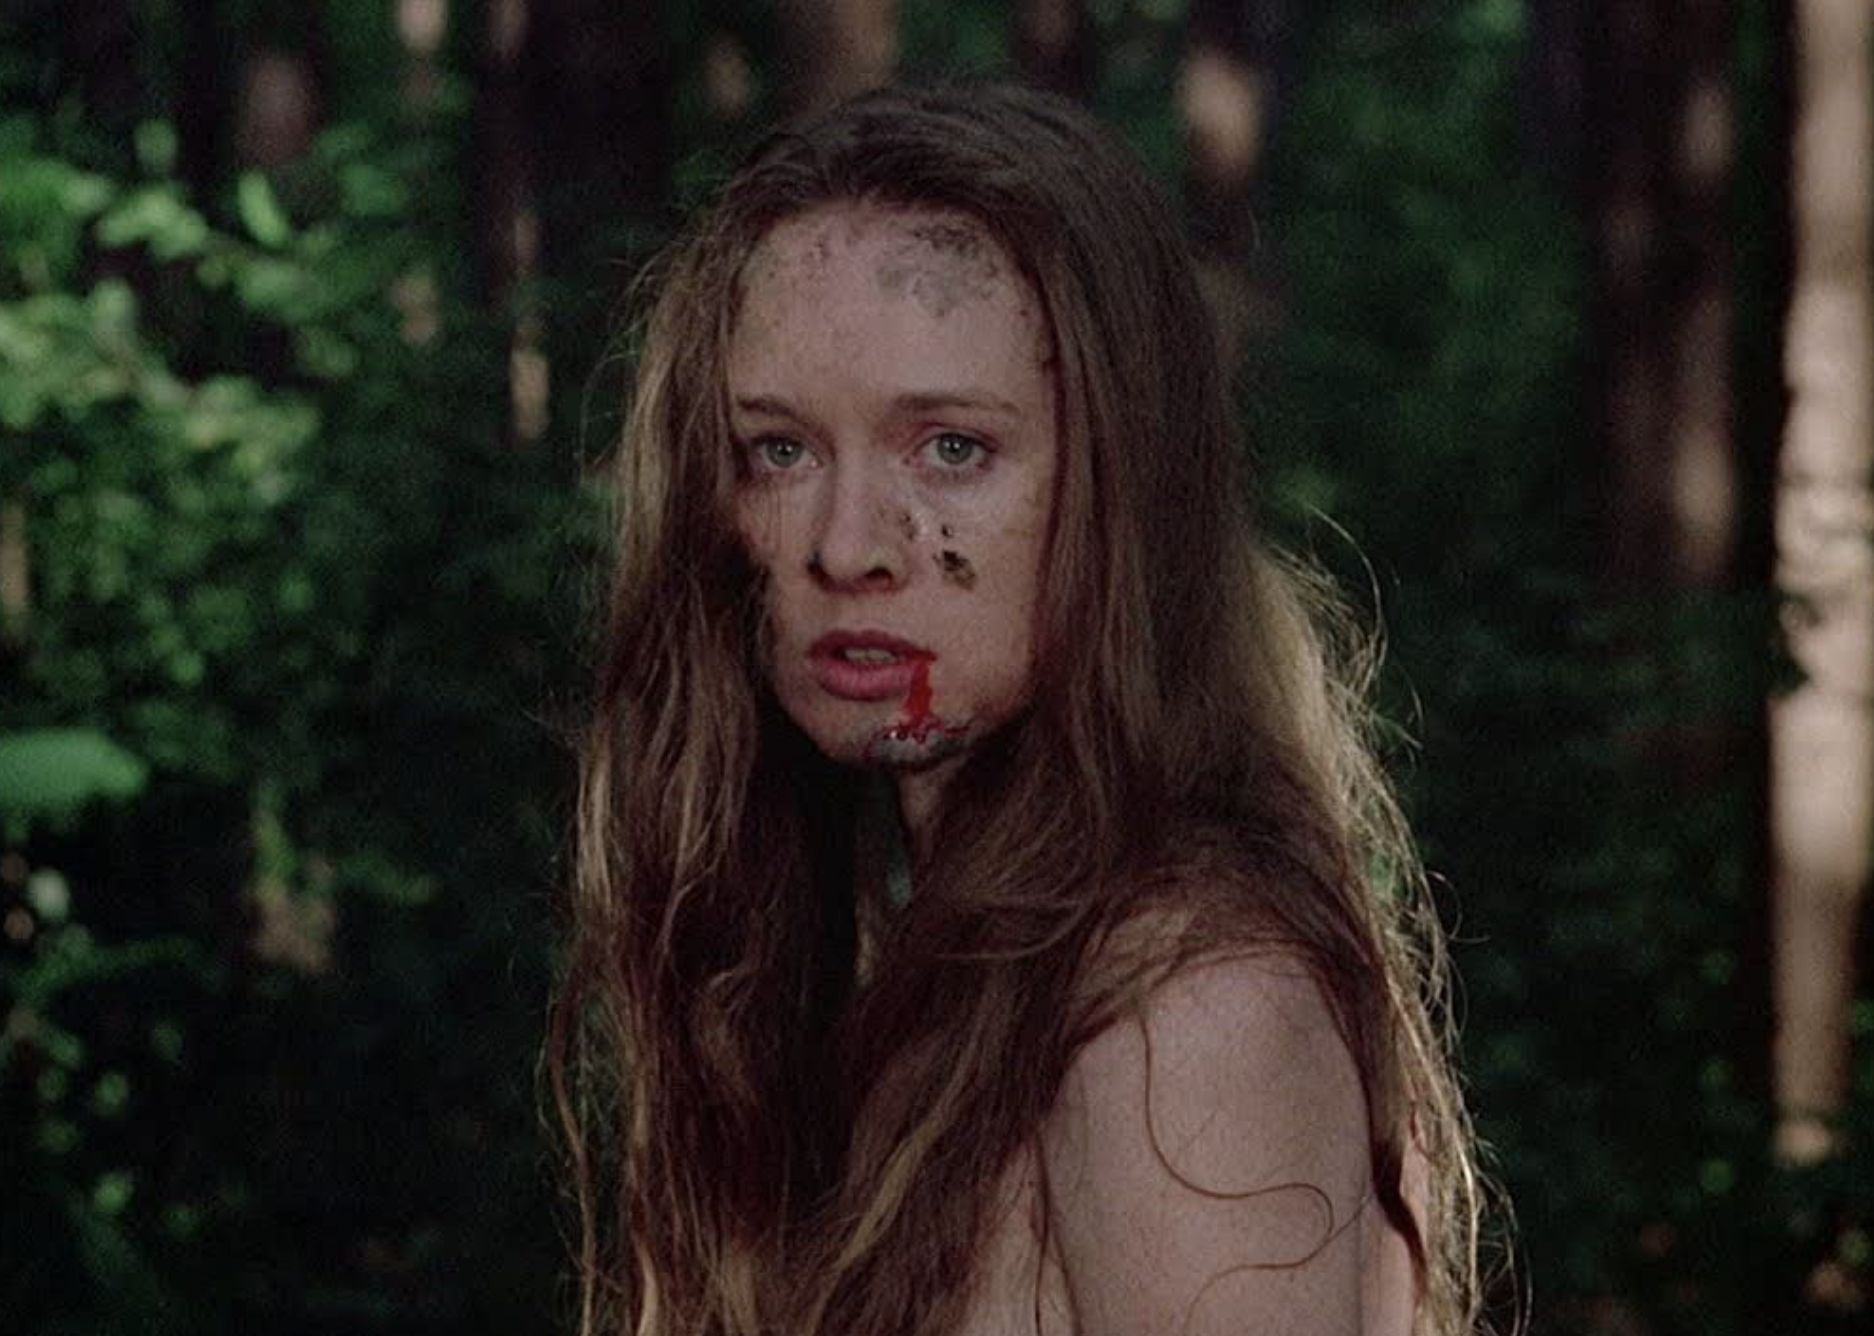 Camille Keaton in "I Spit on Your Grave".